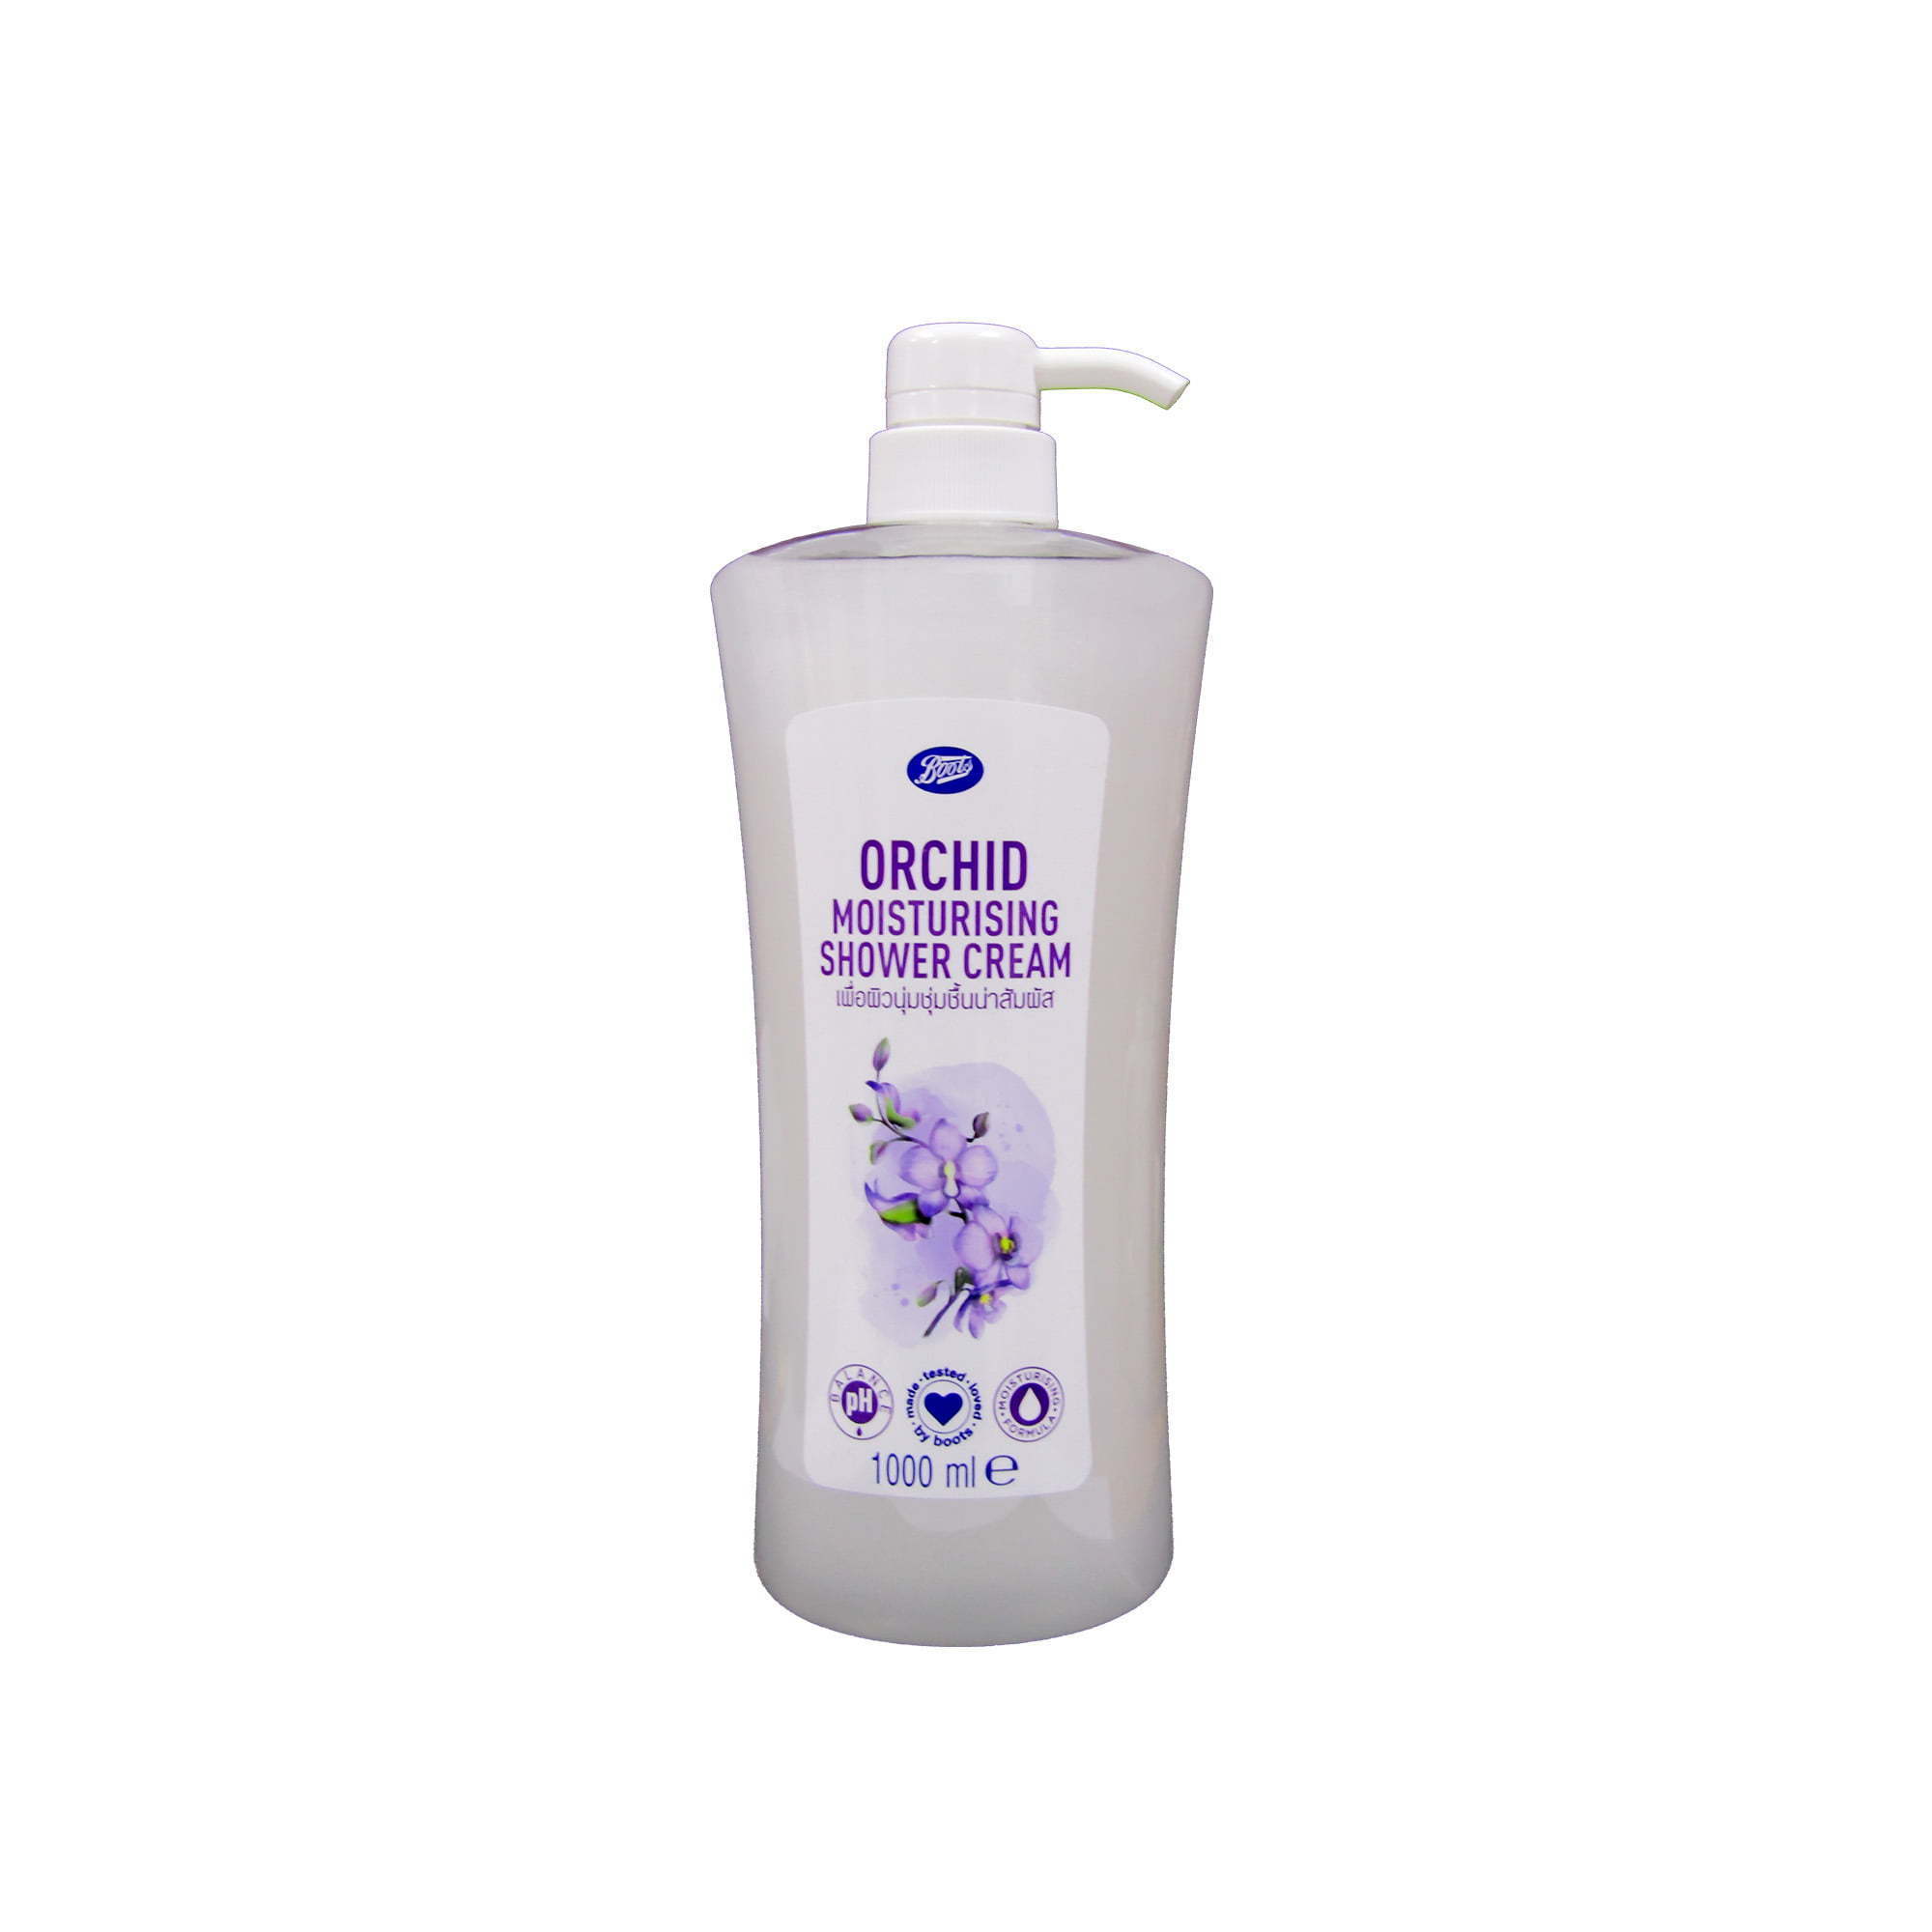 BOOTS ORCHID BODY WASH 1OOO ML